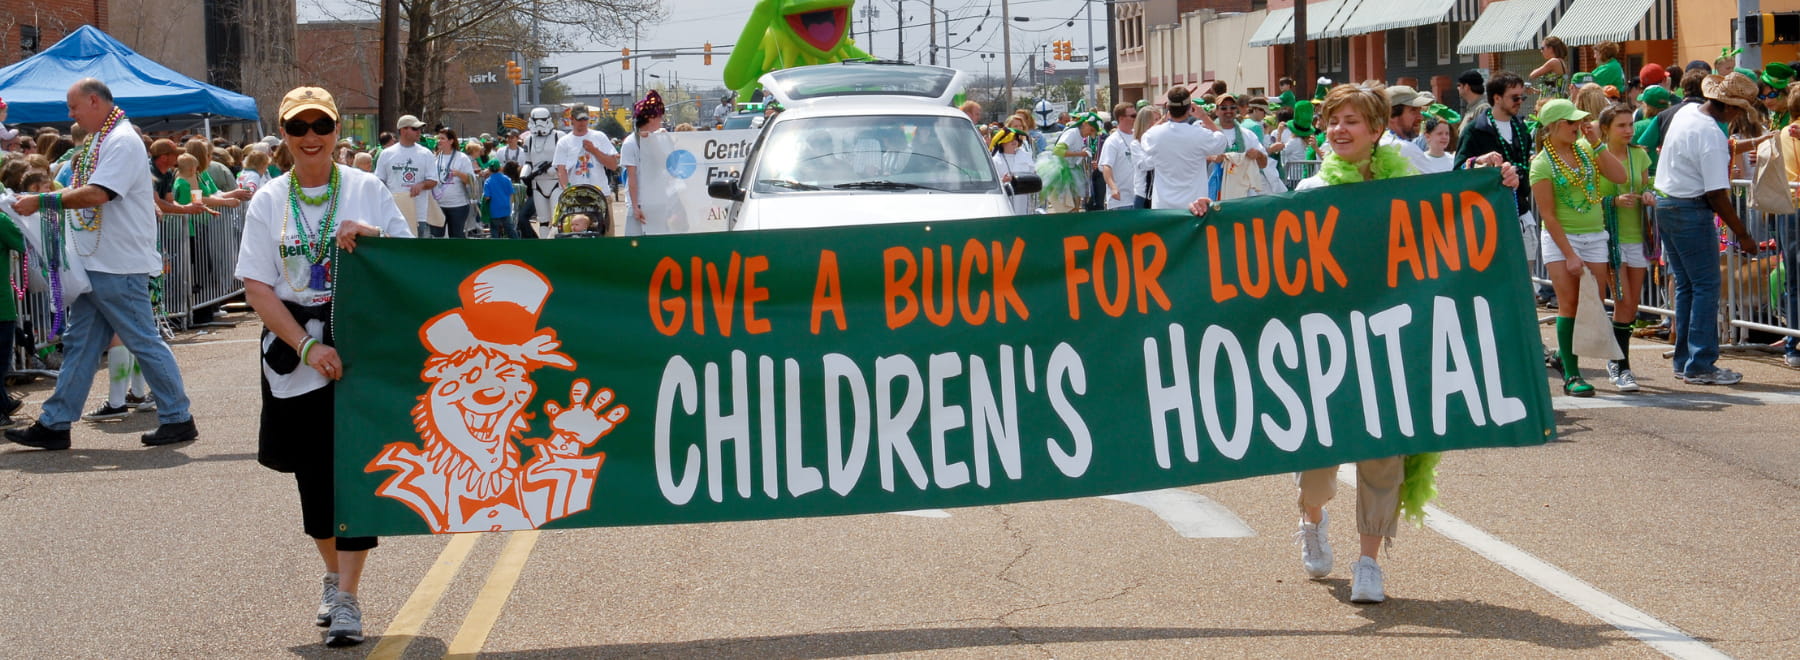 City sweep volunteers lead the Hal's St. Paddy's Parade in this 2009 file photo.